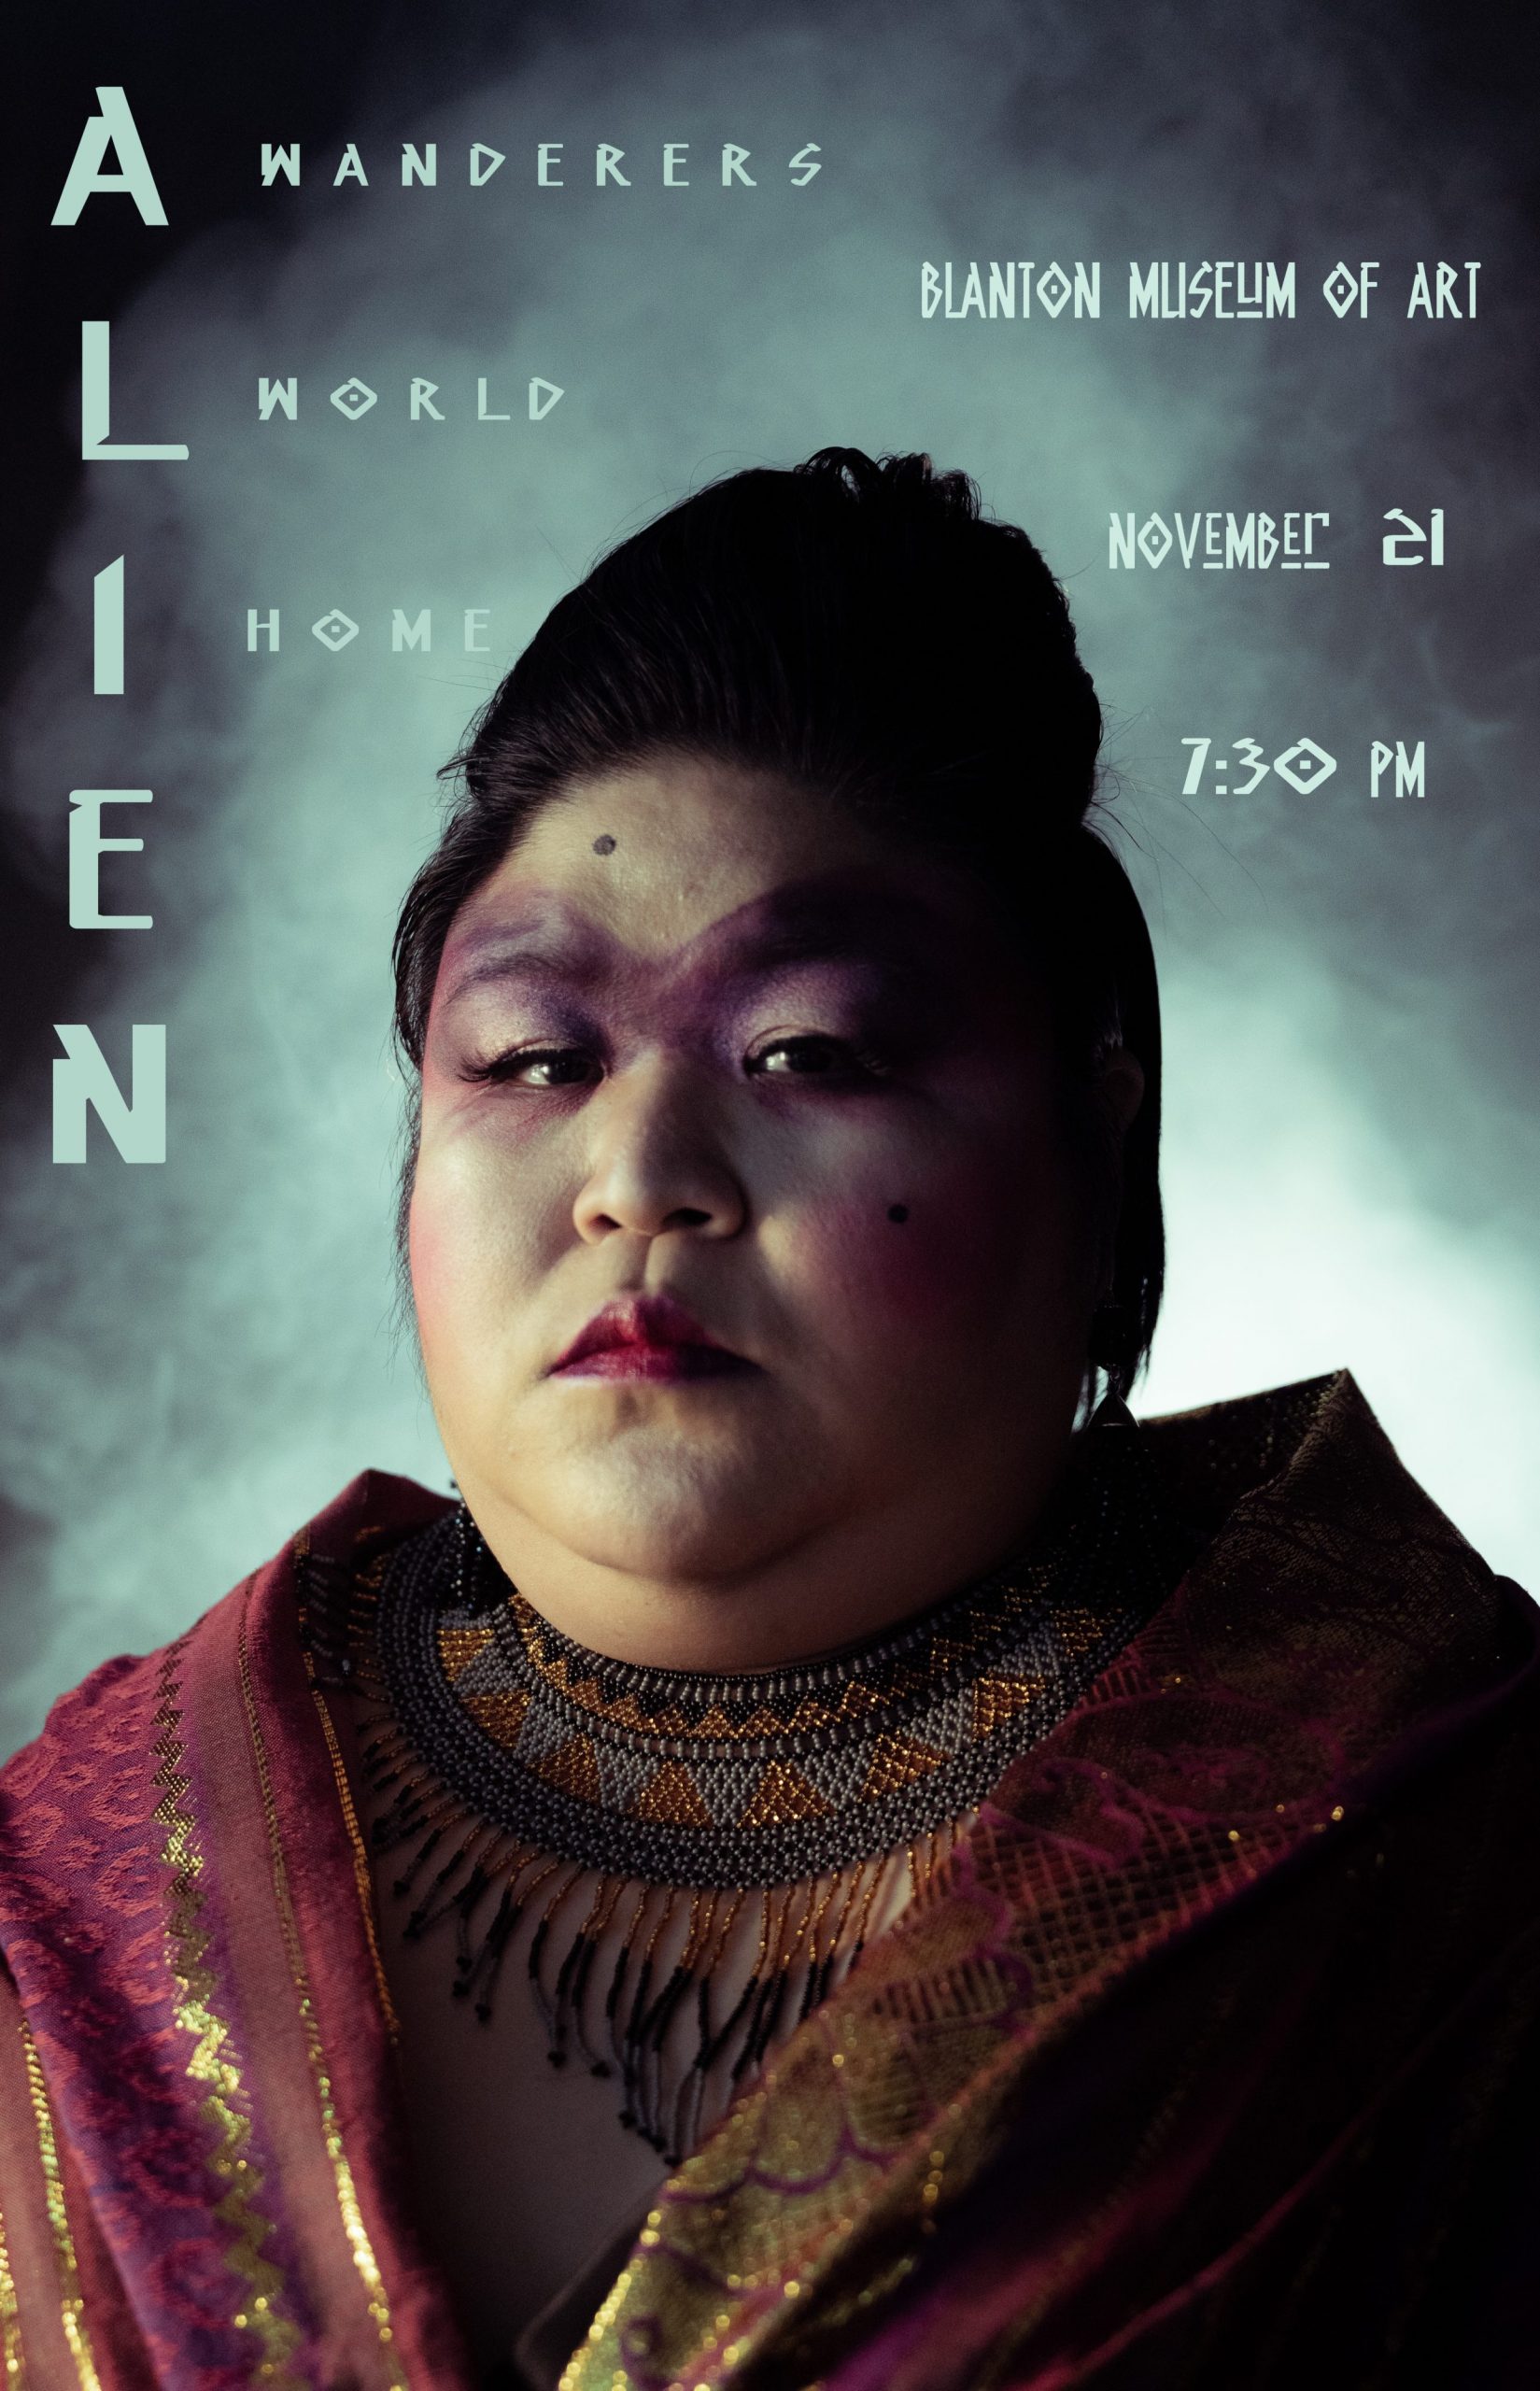 Poster advertising the Alien opera performed at the Blanton, the poster depicts a woman in fantasy makeup